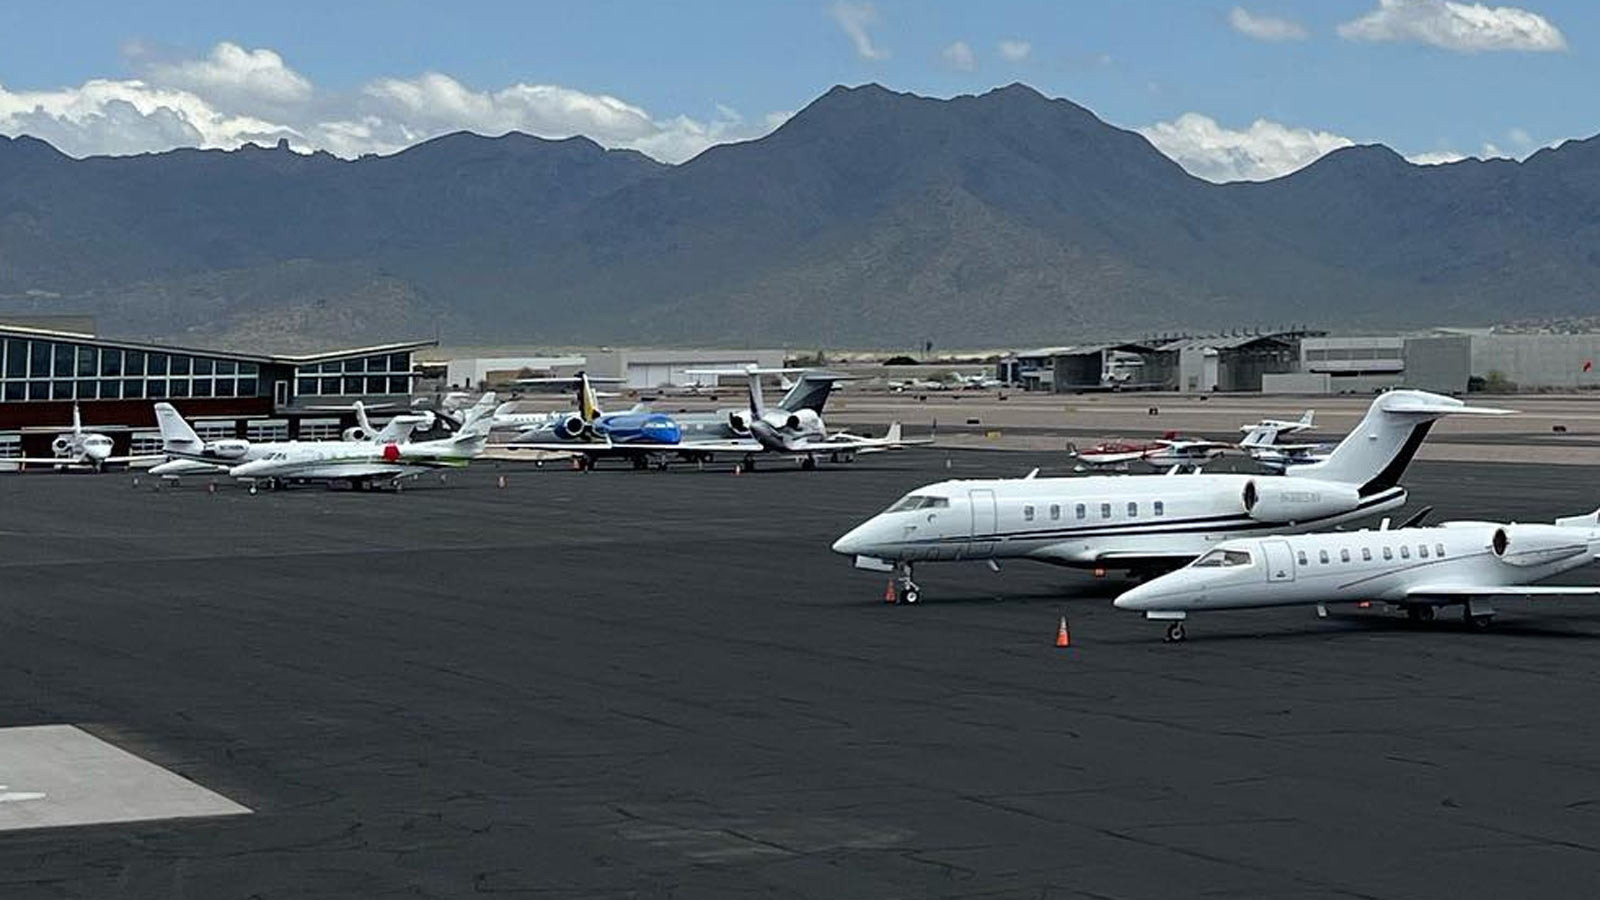 Peoria is looking into developing an airport complex similar to Scottsdale Airpark, which is pictur...